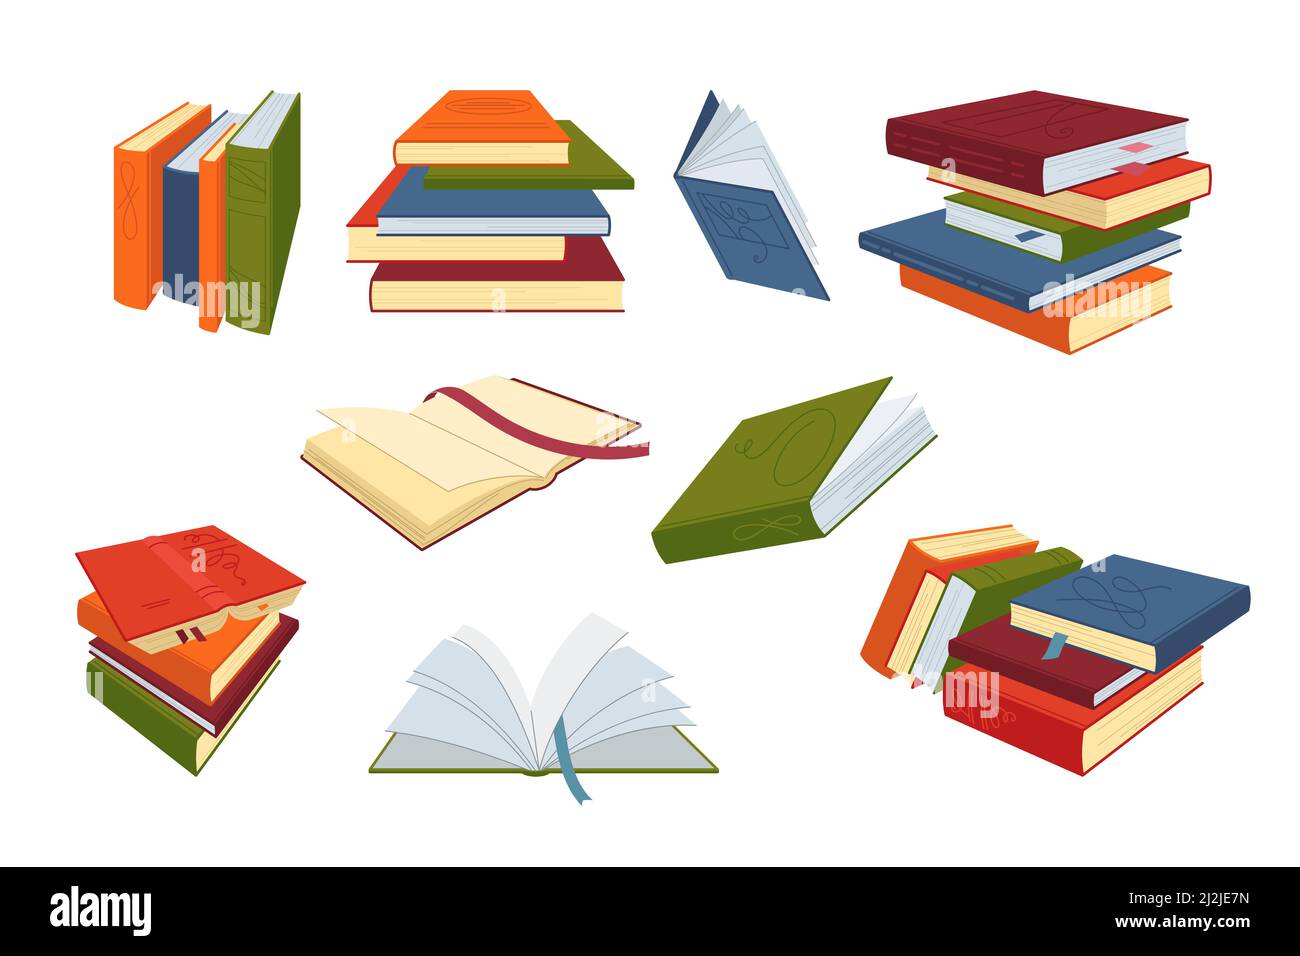 https://c8.alamy.com/comp/2J2JE7N/stack-of-books-for-study-set-vector-illustrations-of-open-and-closed-books-with-bookmarks-cartoon-paper-notebook-textbook-dictionary-from-library-2J2JE7N.jpg